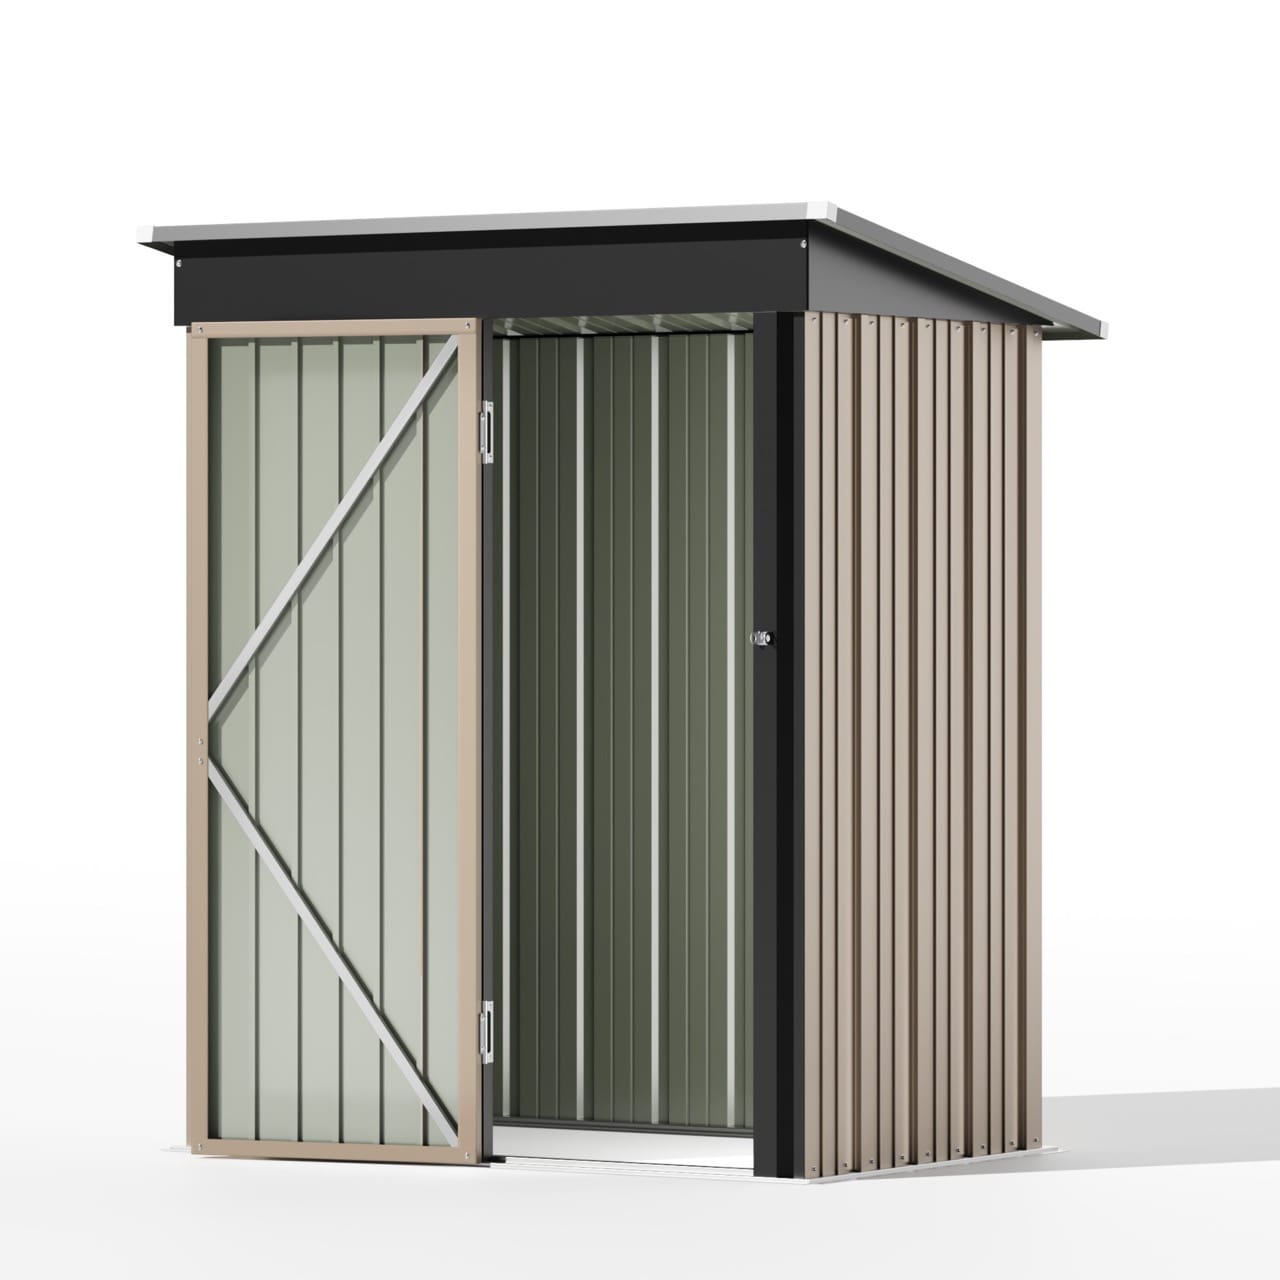 Patiowell 5x3 Metal Shed Pro